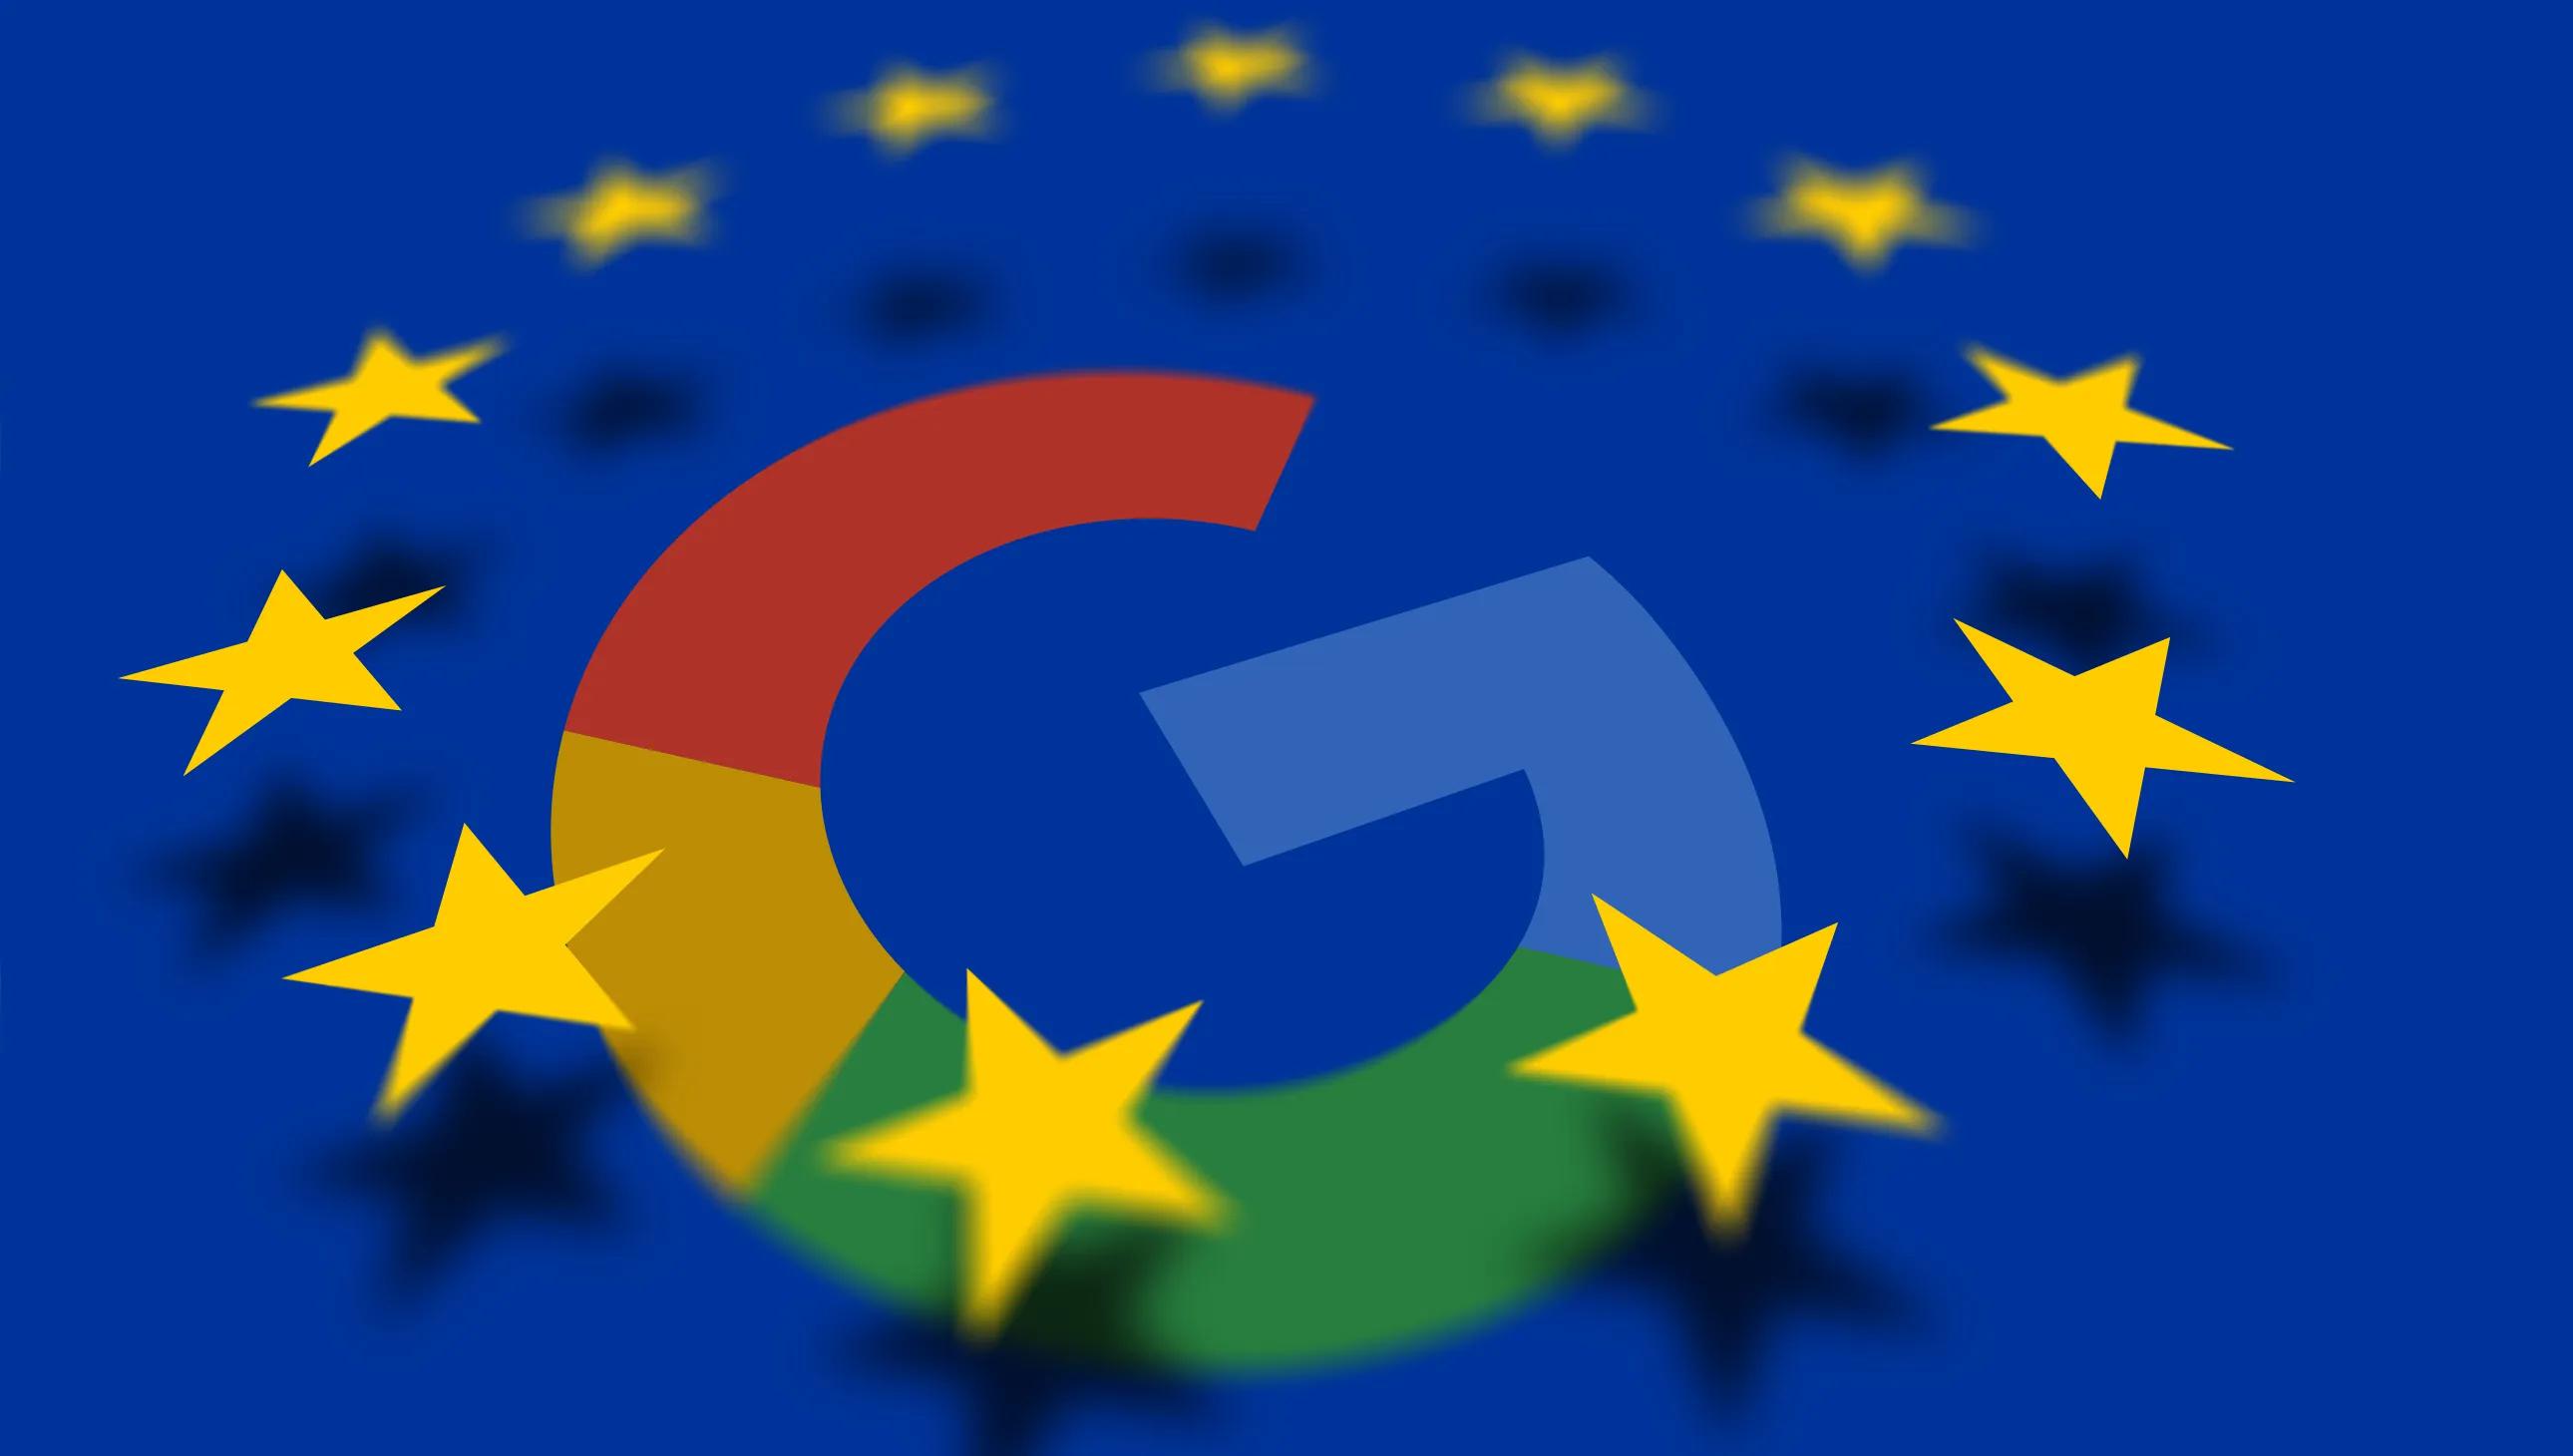 Google invests 25 million euros in artificial intelligence training in Europe